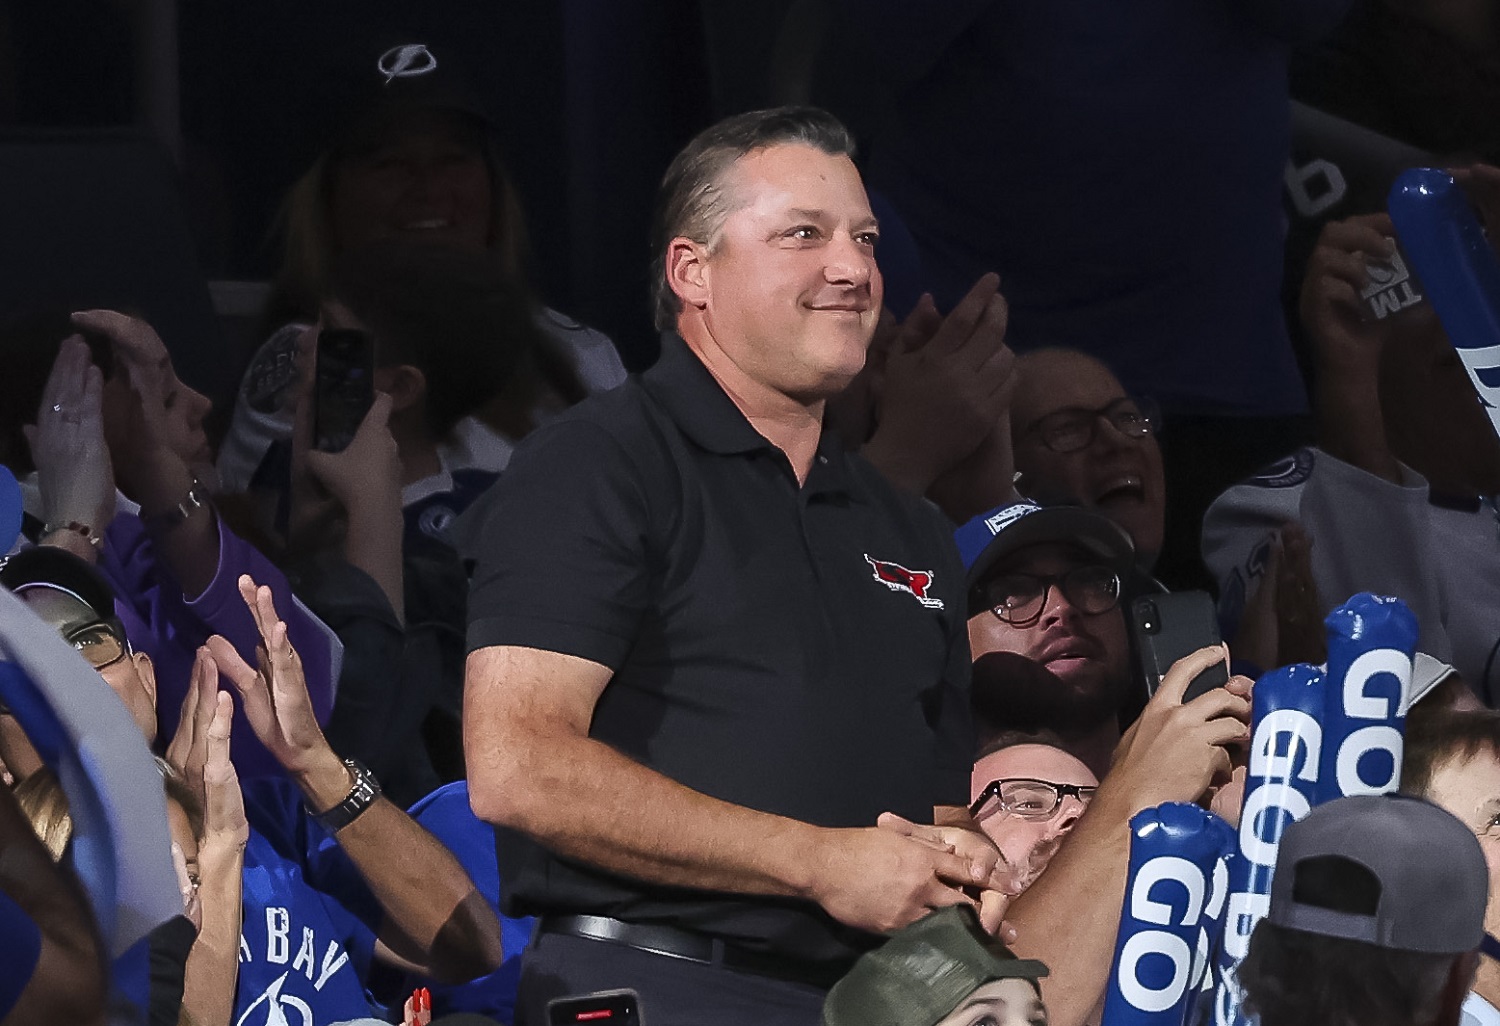 NASCAR Driver Tony Stewart makes an appearance at the game between the Tampa Bay Lightning against the Anaheim Ducks on Feb. 21, 2023 in Tampa, Florida.